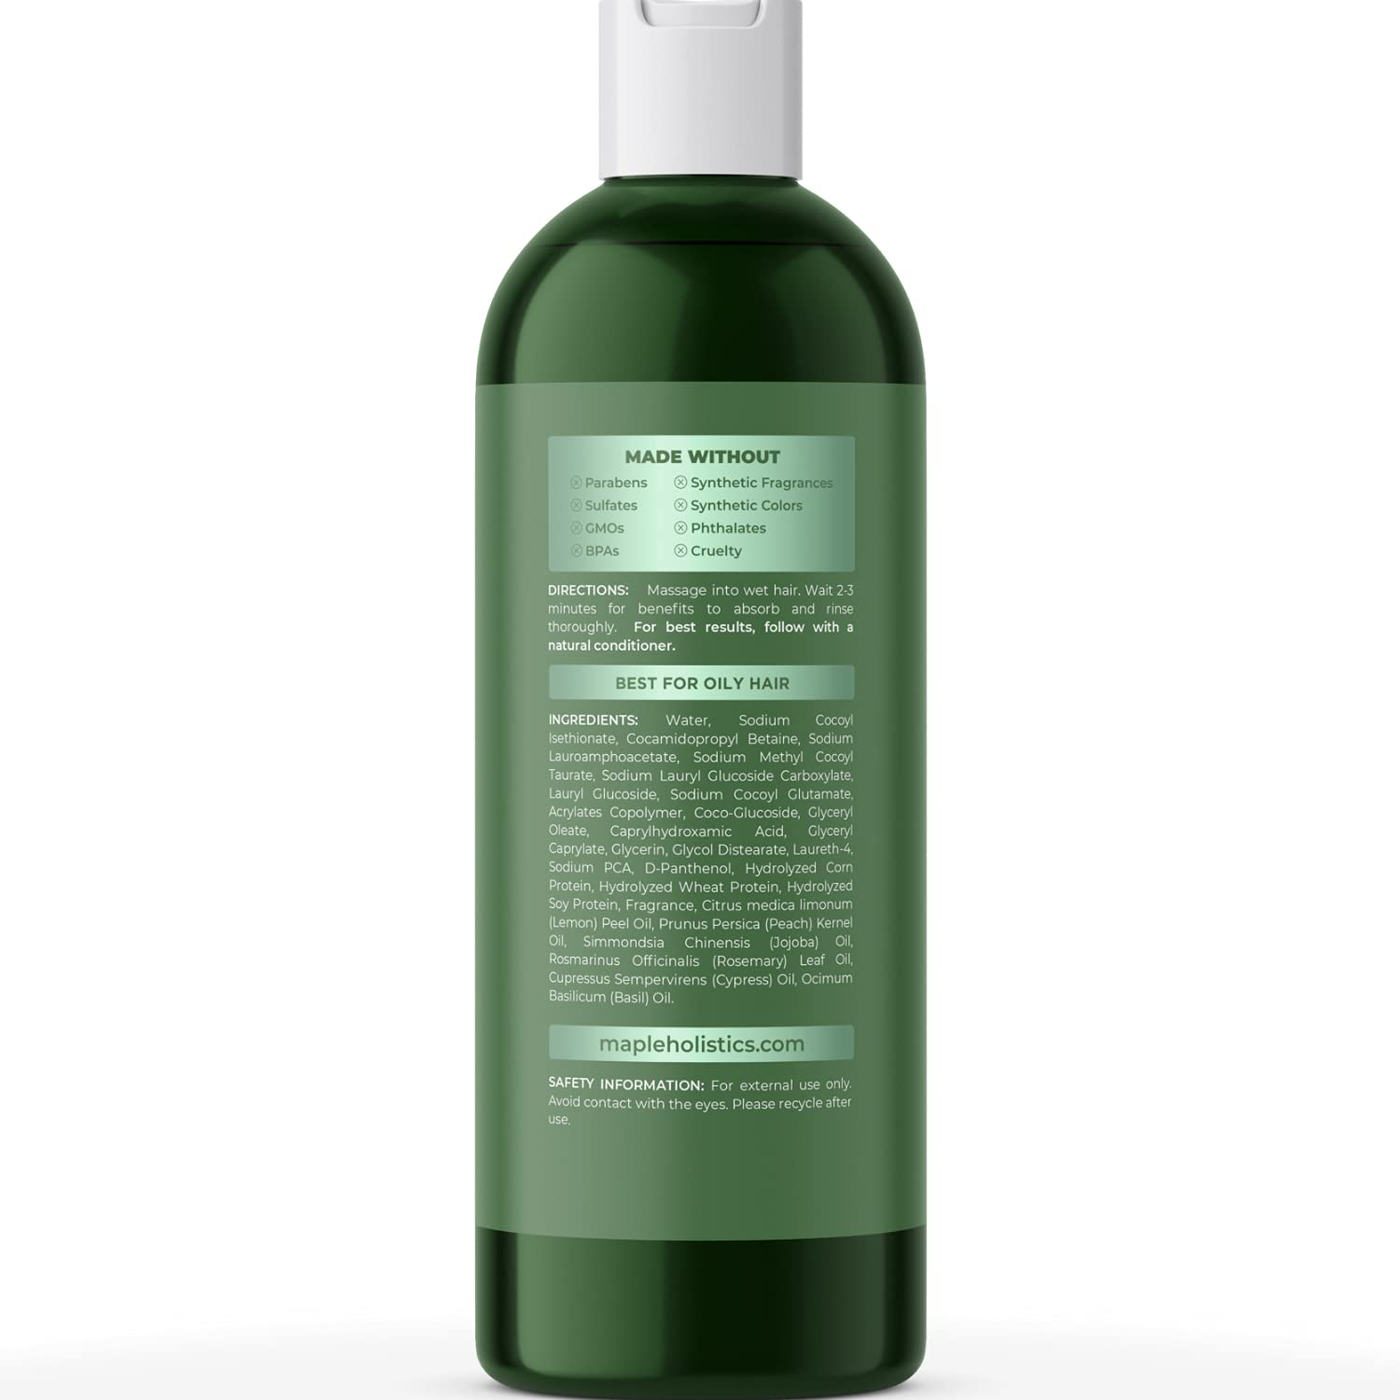 Degrease Shampoo for Oily Hair Care - Clarifying Shampoo for Oily Hair and Oily Scalp Care - Deep Cleansing Shampoo for Greasy Hair and Scalp Cleanser for Build Up with Natural Essential Oils for Hair